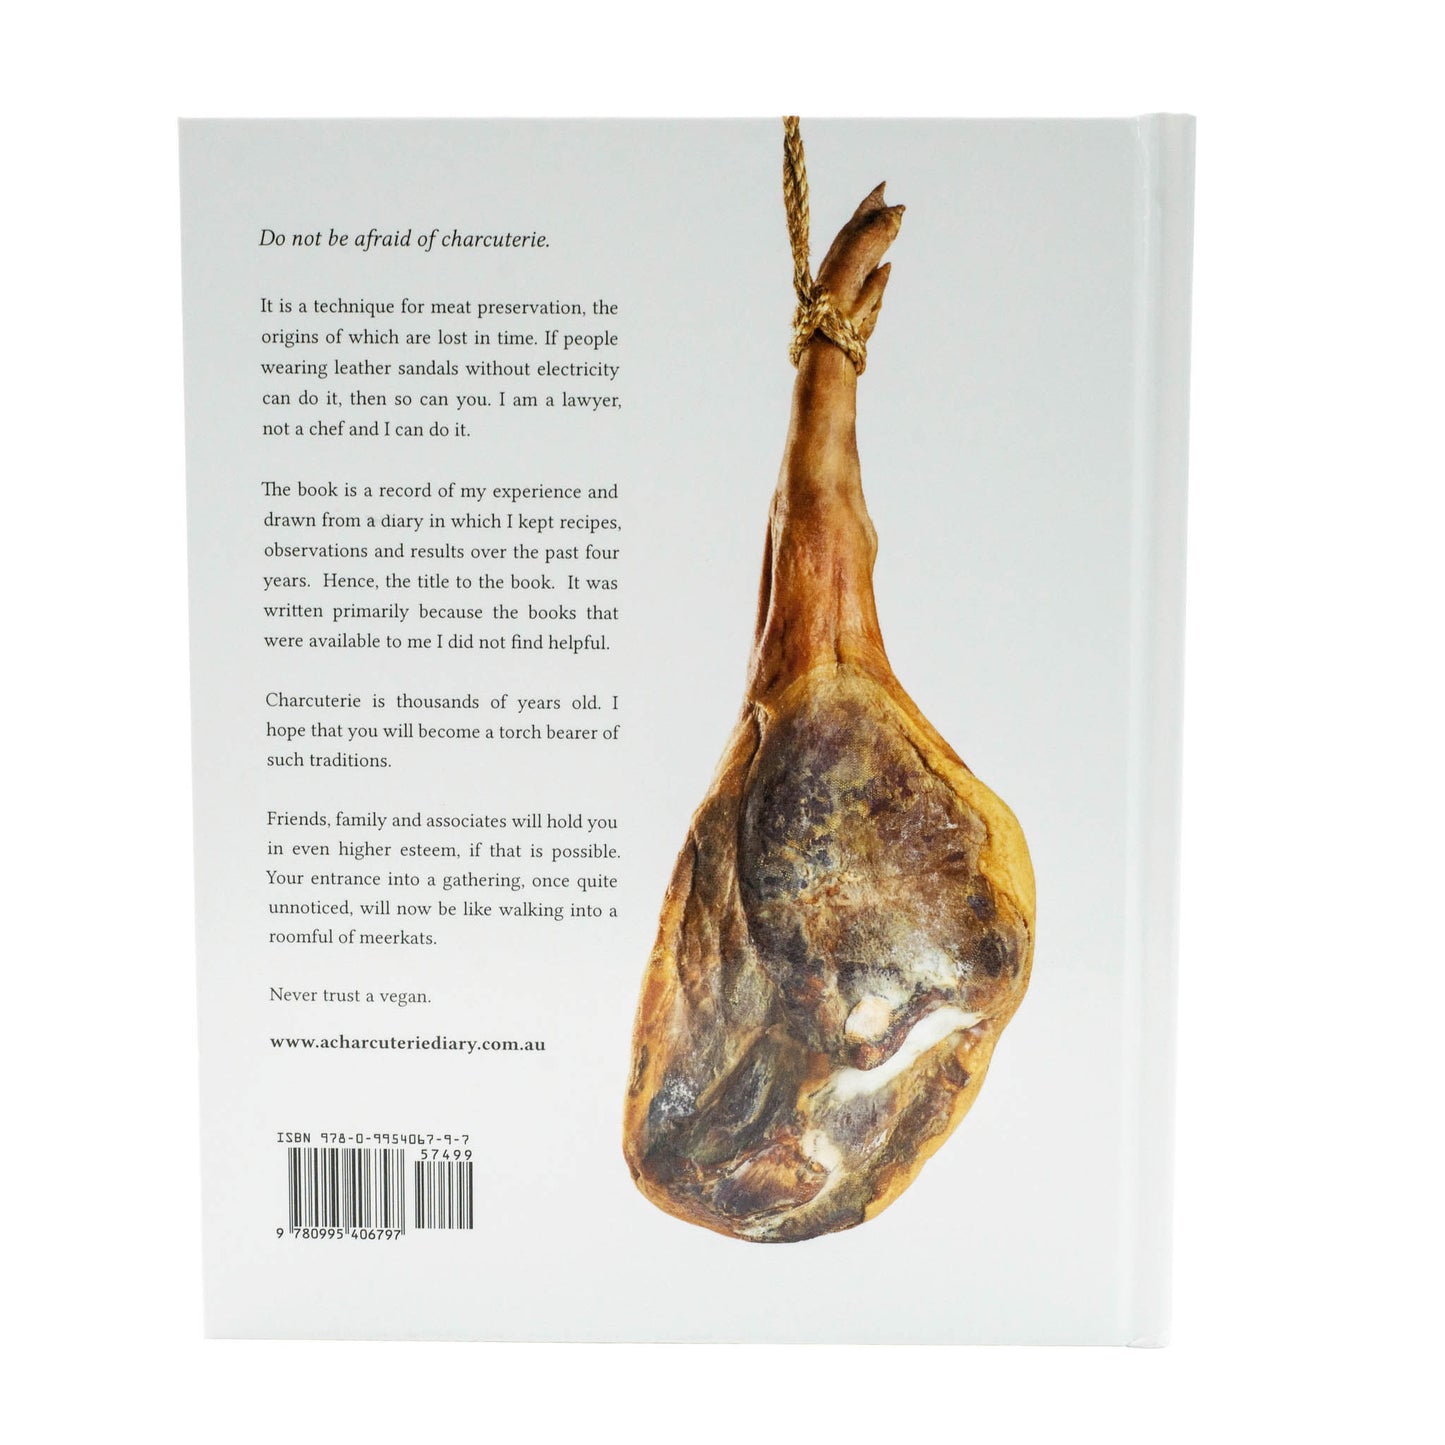 a comprehensive book of recipes and information regarding meat preservation and curing by P J Booth